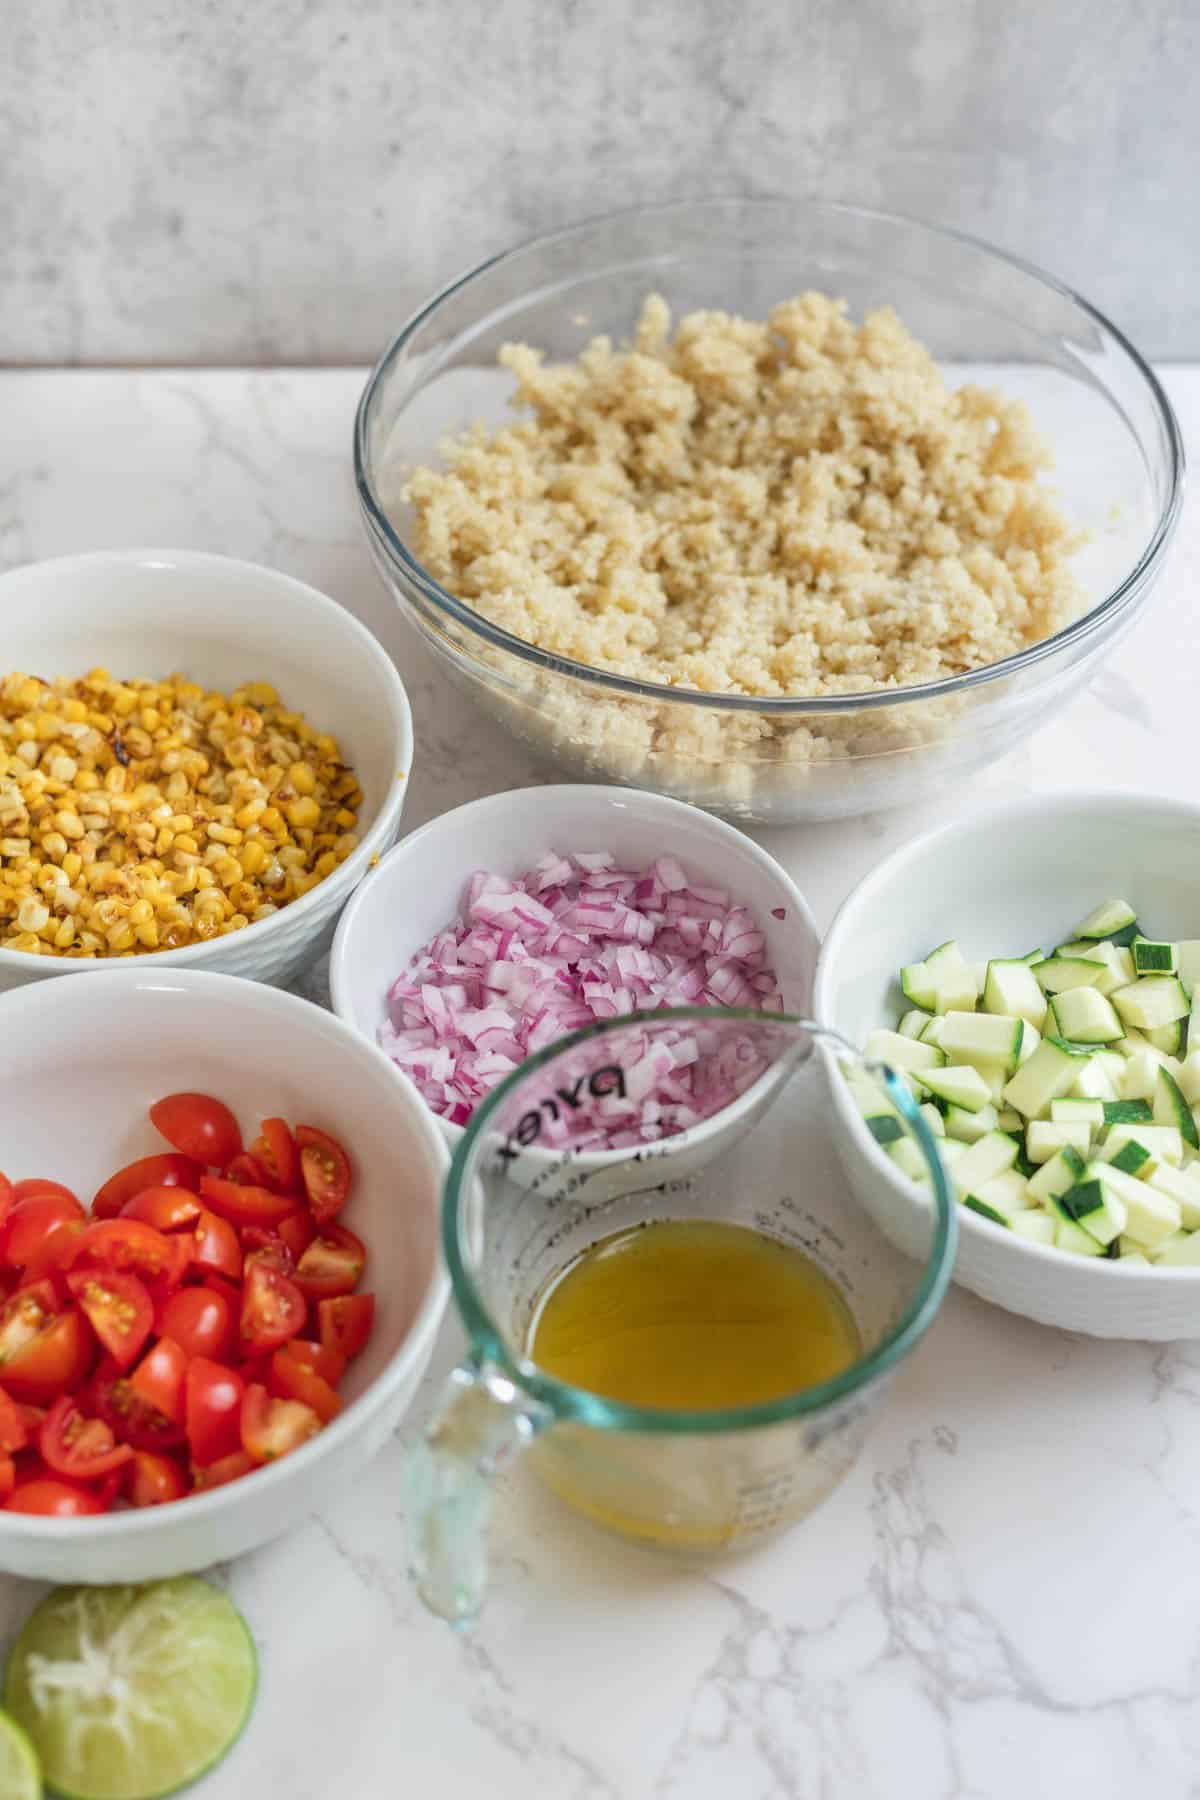 bowls of ingredients including quinoa, corn, shallots, zucchini, tomatoes, limes, and olive oil